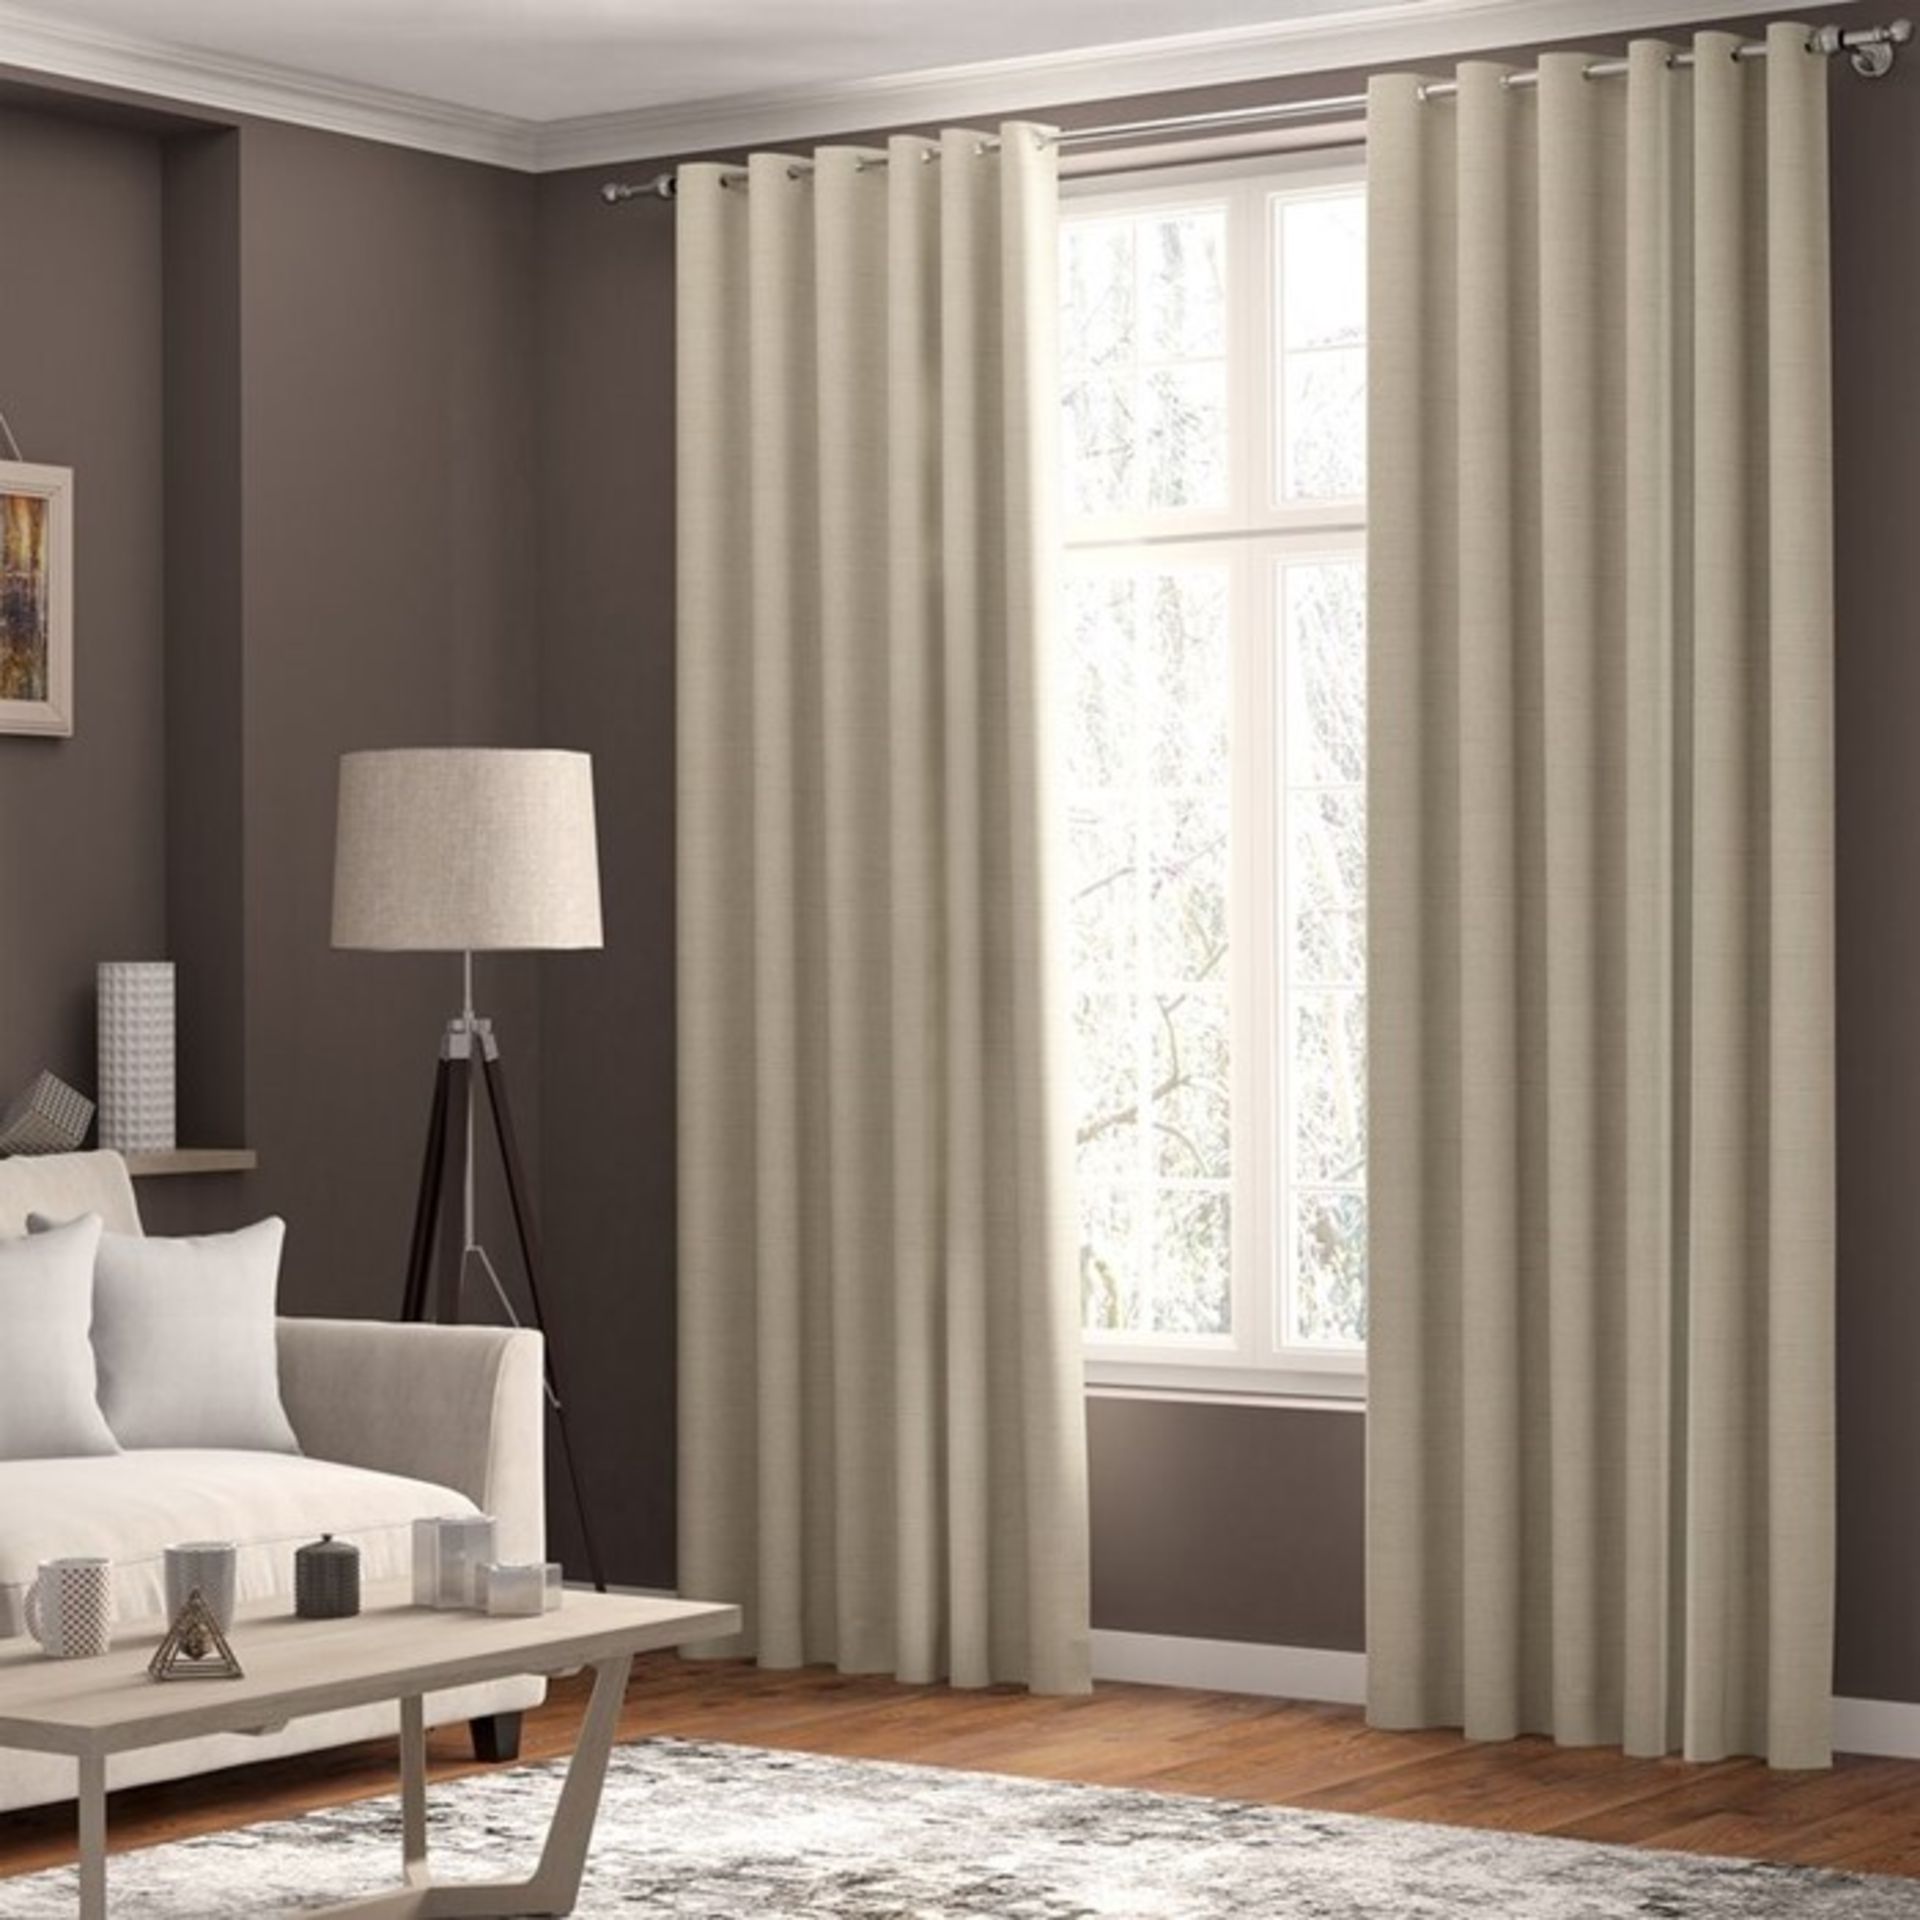 ClassicLiving, Shives Eyelet Blackout Thermal Curtains Colour: Burgundy, Size per Panel: 168 W x 183